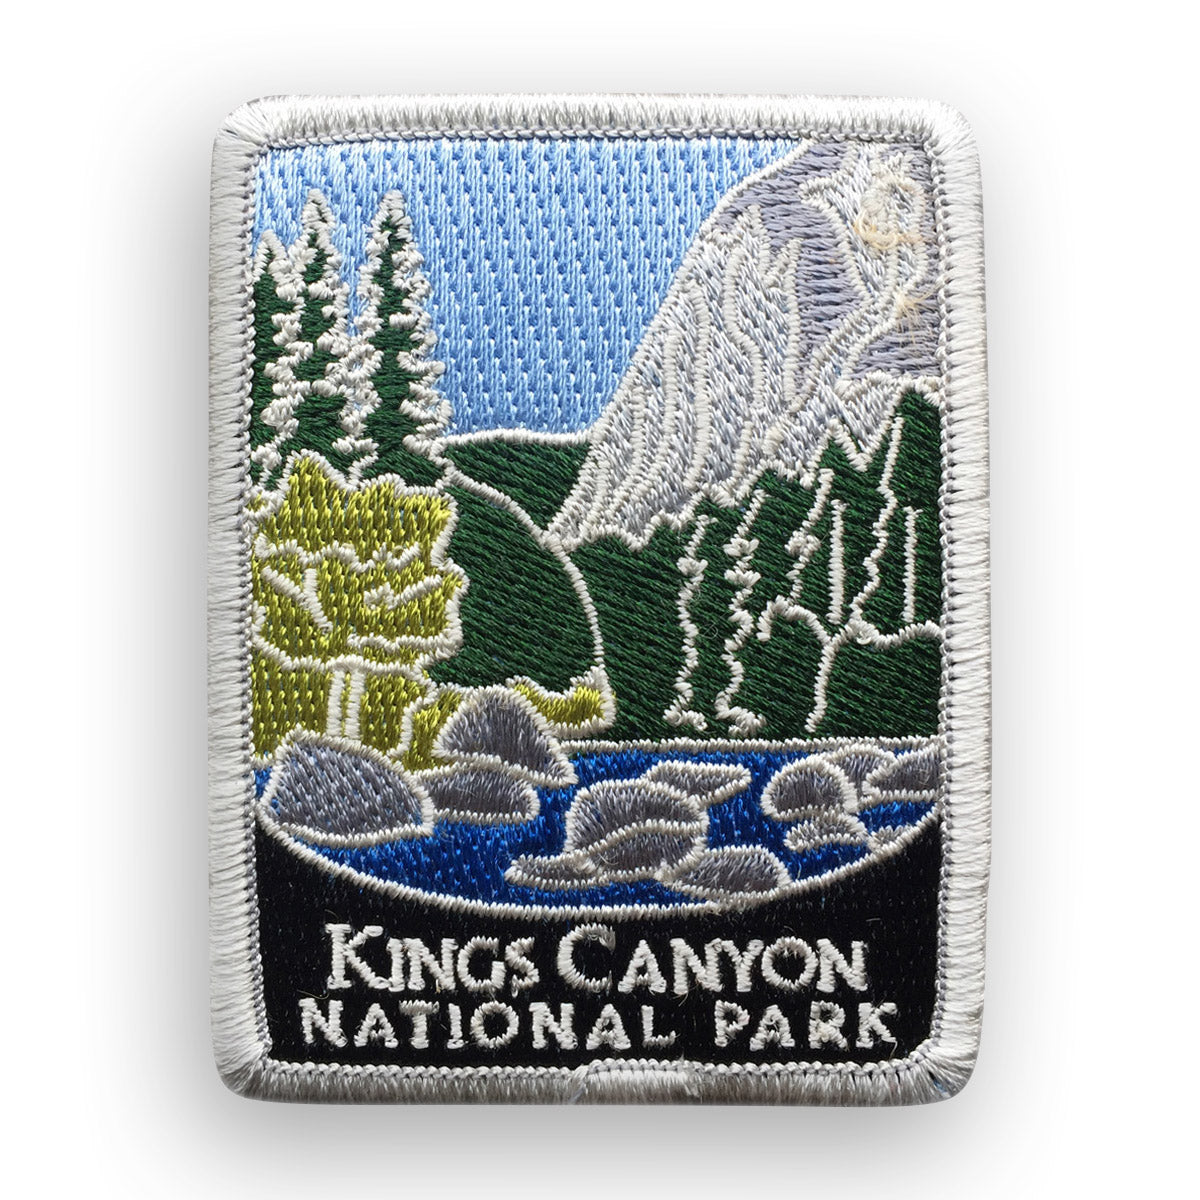 Kings Canyon National Park Traveler Patch